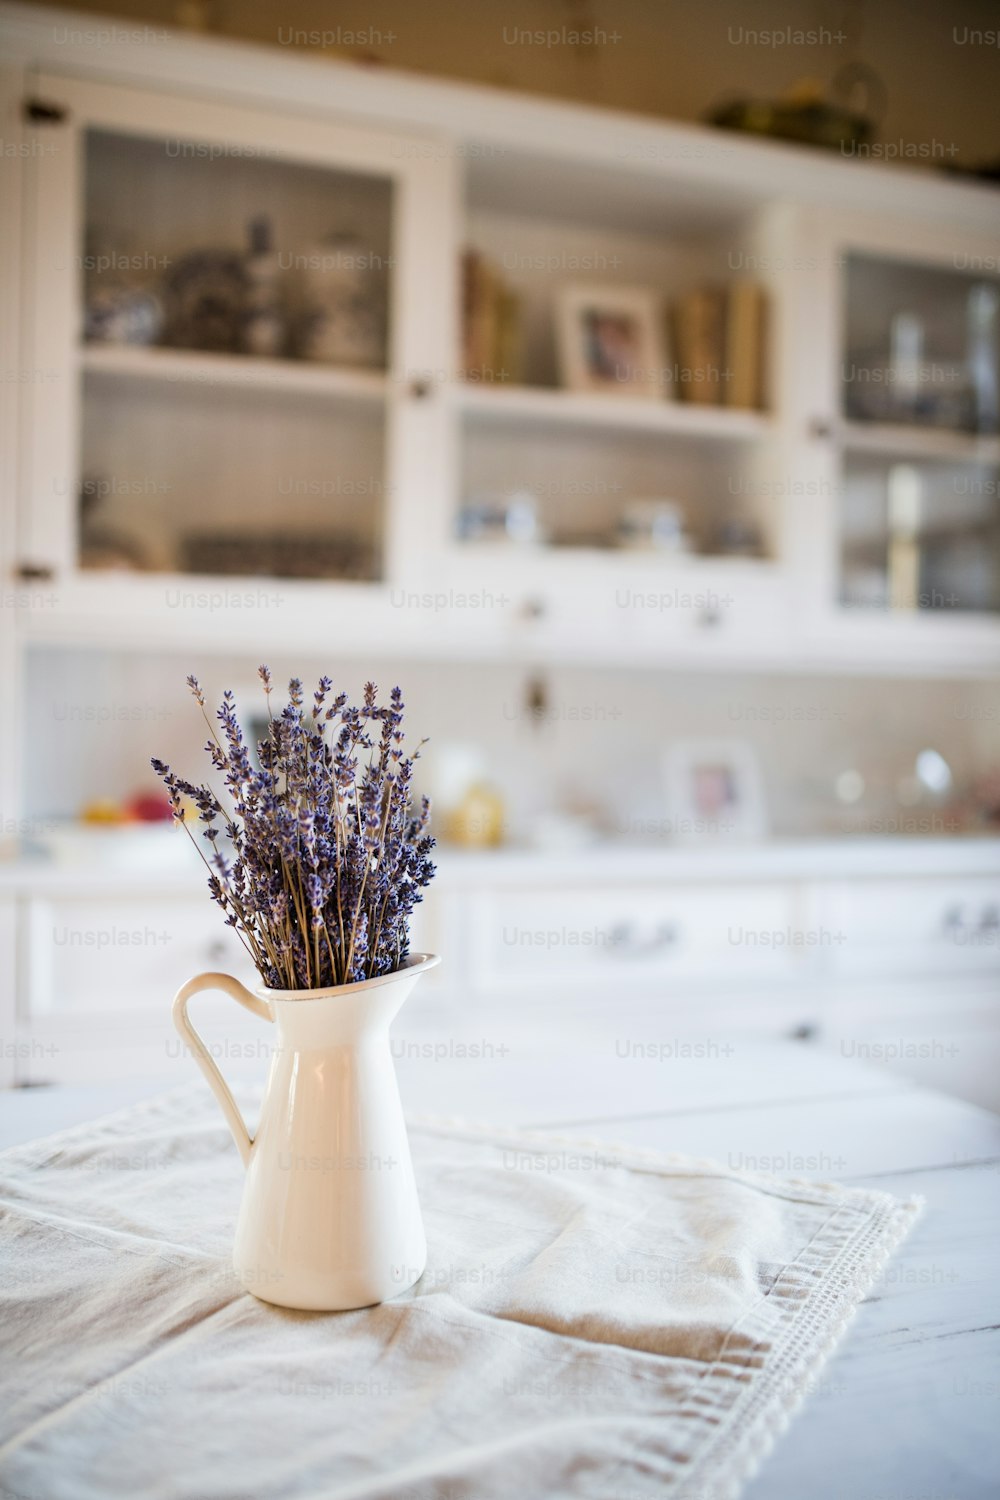 Dried lavender bunch in a white vase on the table in a vintage kitchen.